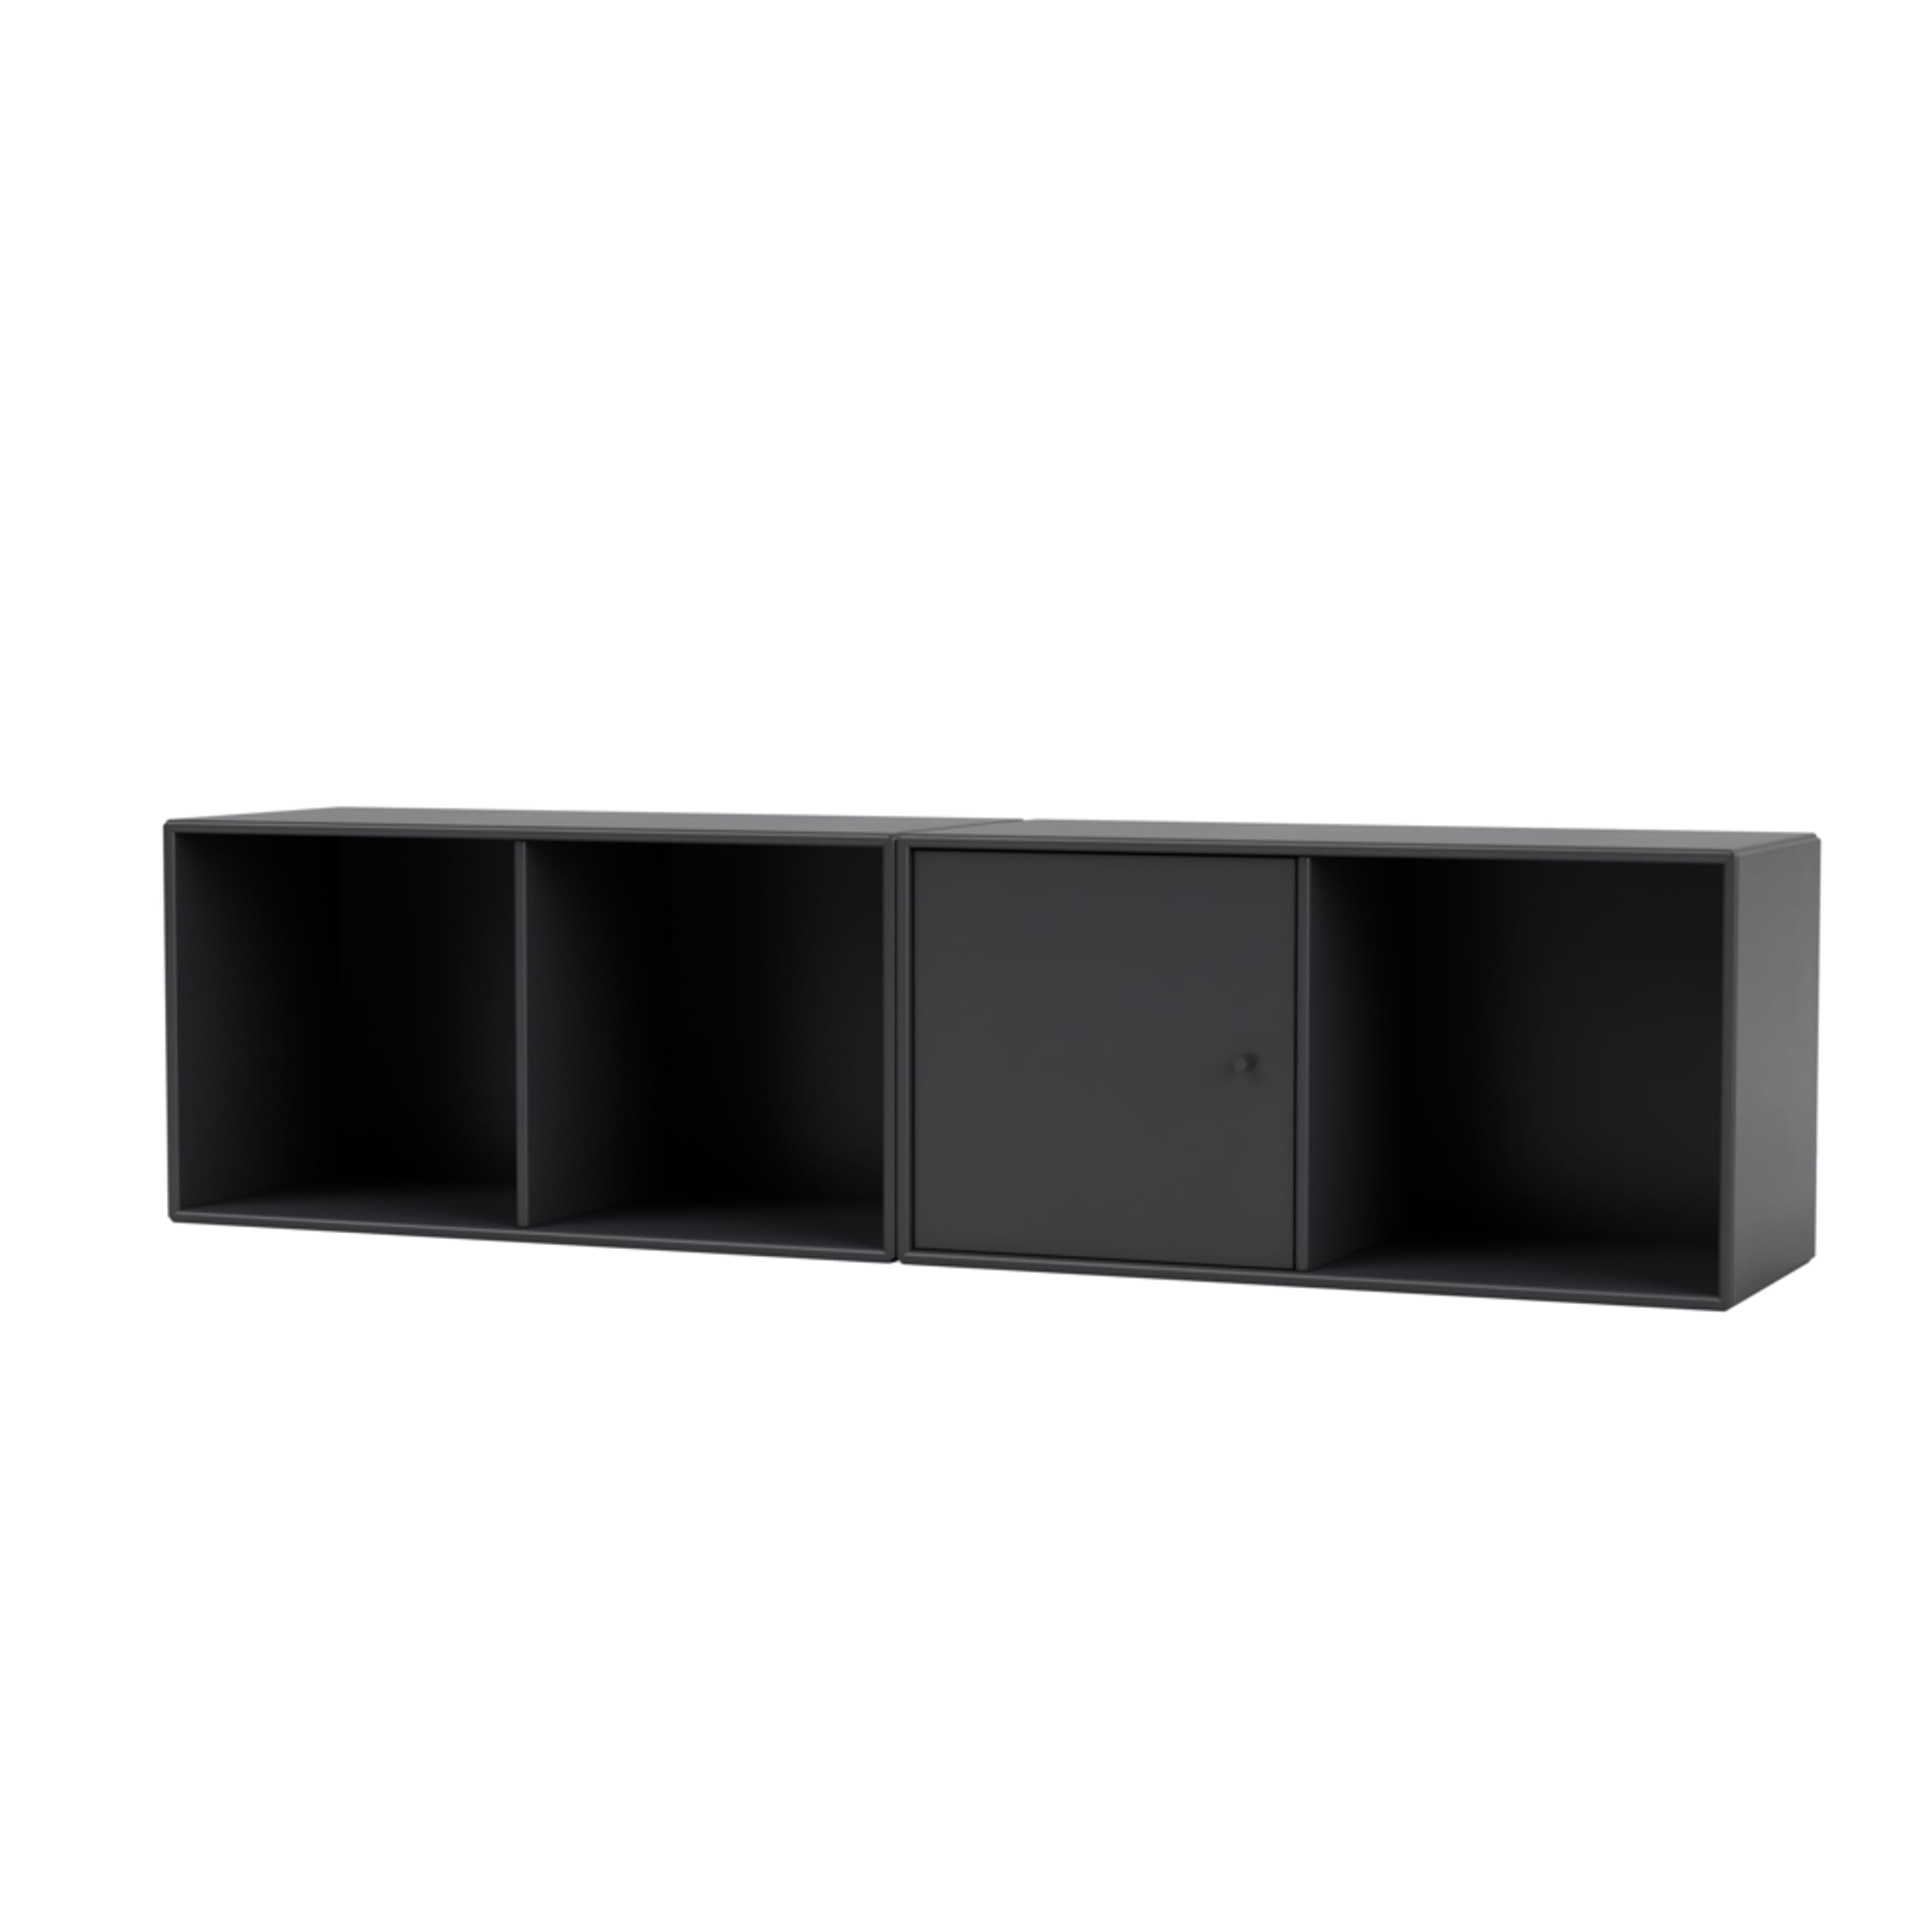 Montana - LINE - Wall mounted - Sideboard - Anthracite